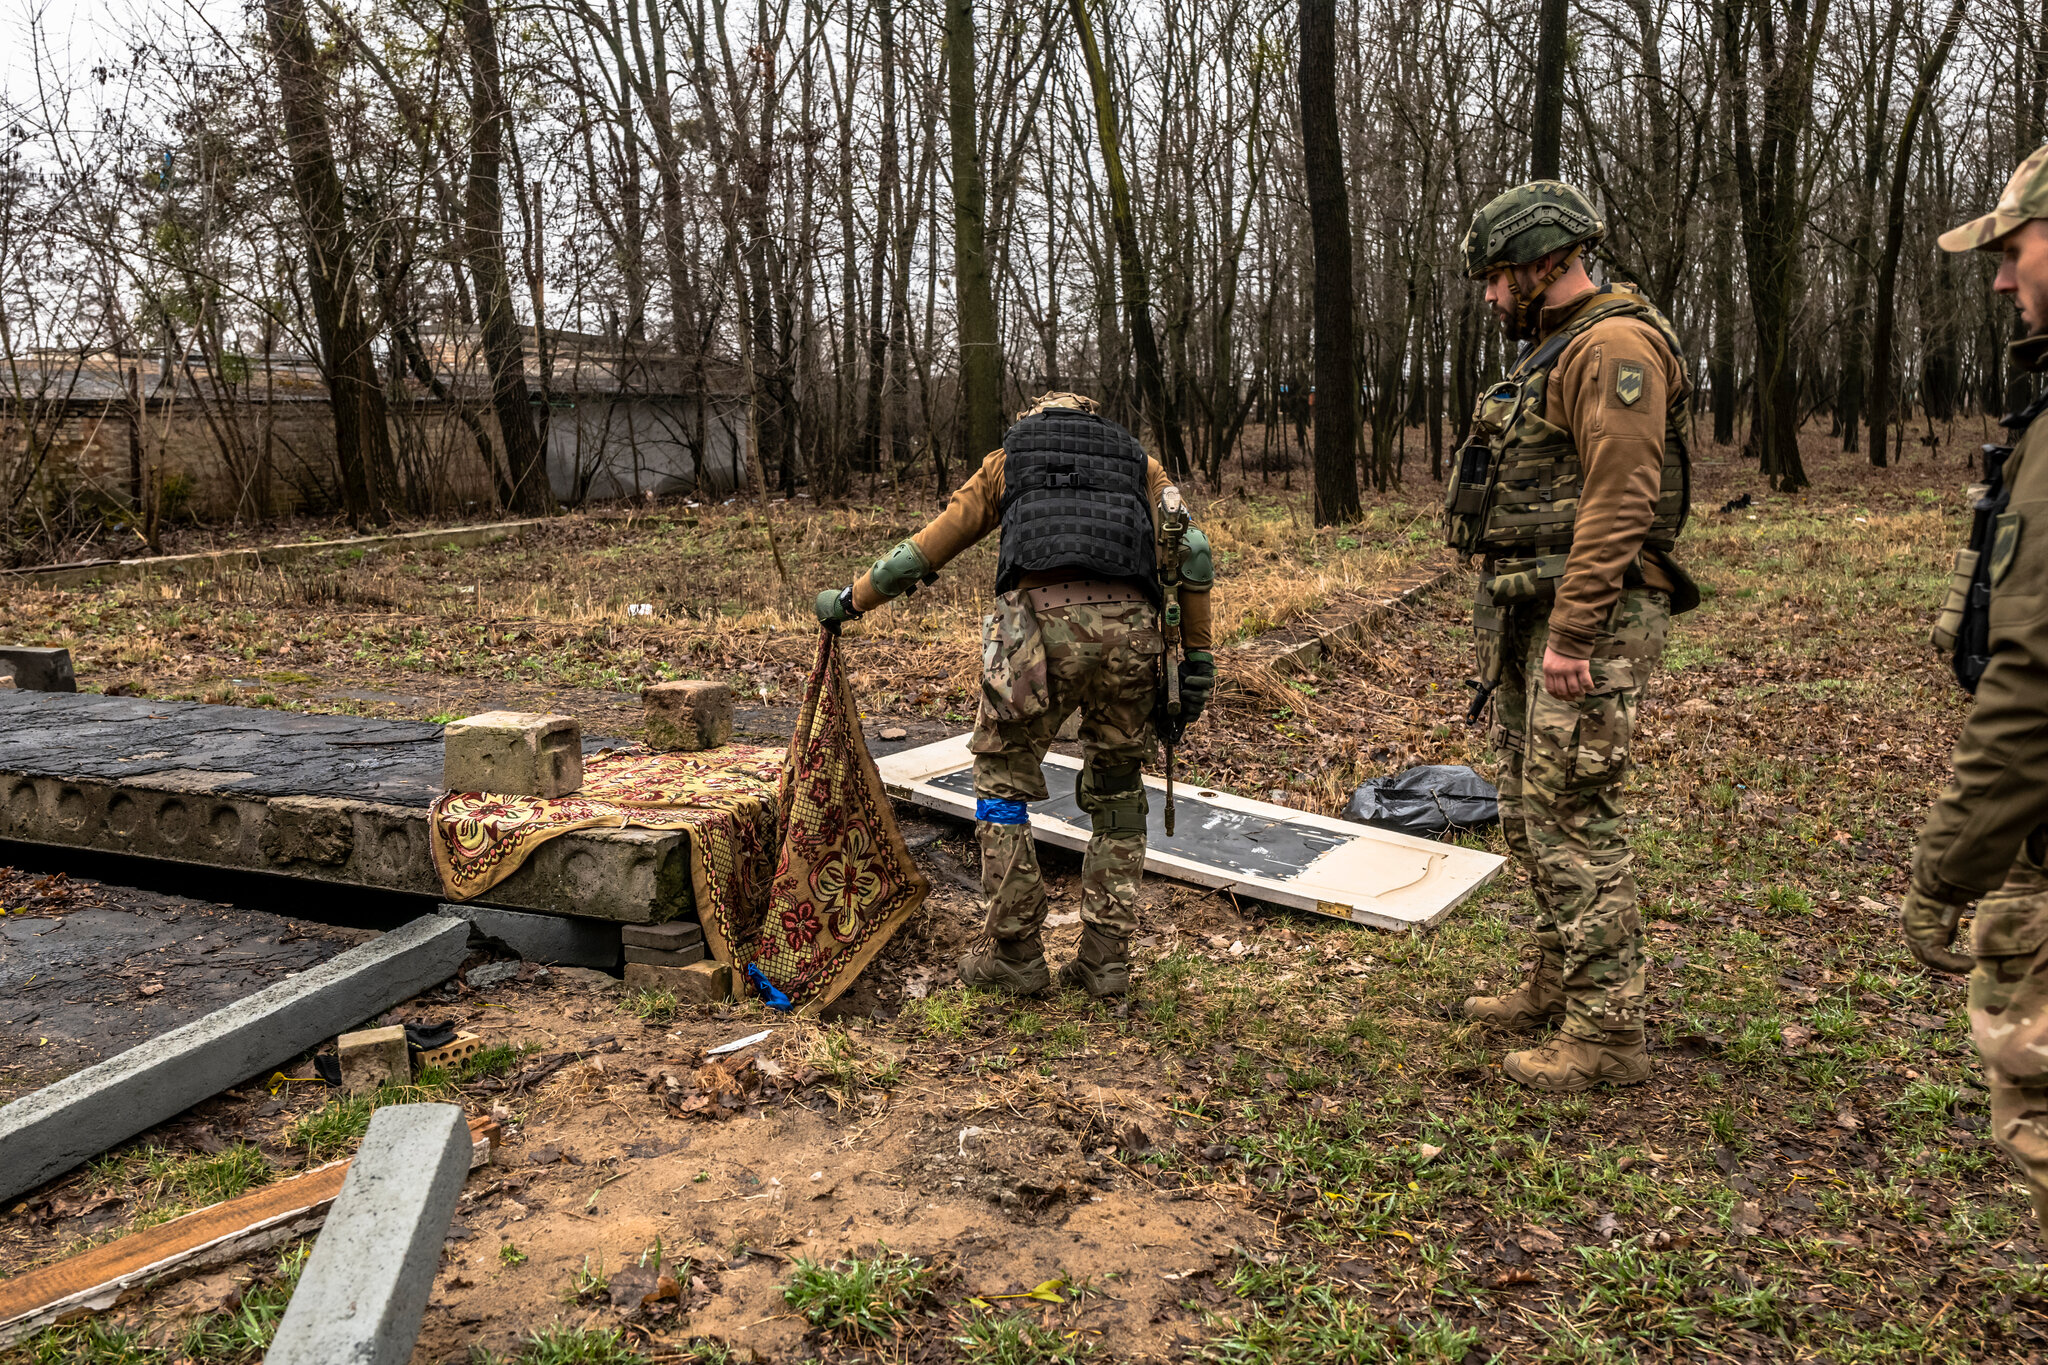 Ukrainian soldiers of the Azov battalion examined an underground space where the bodies of two civilians, a man and a woman, had been dumped.